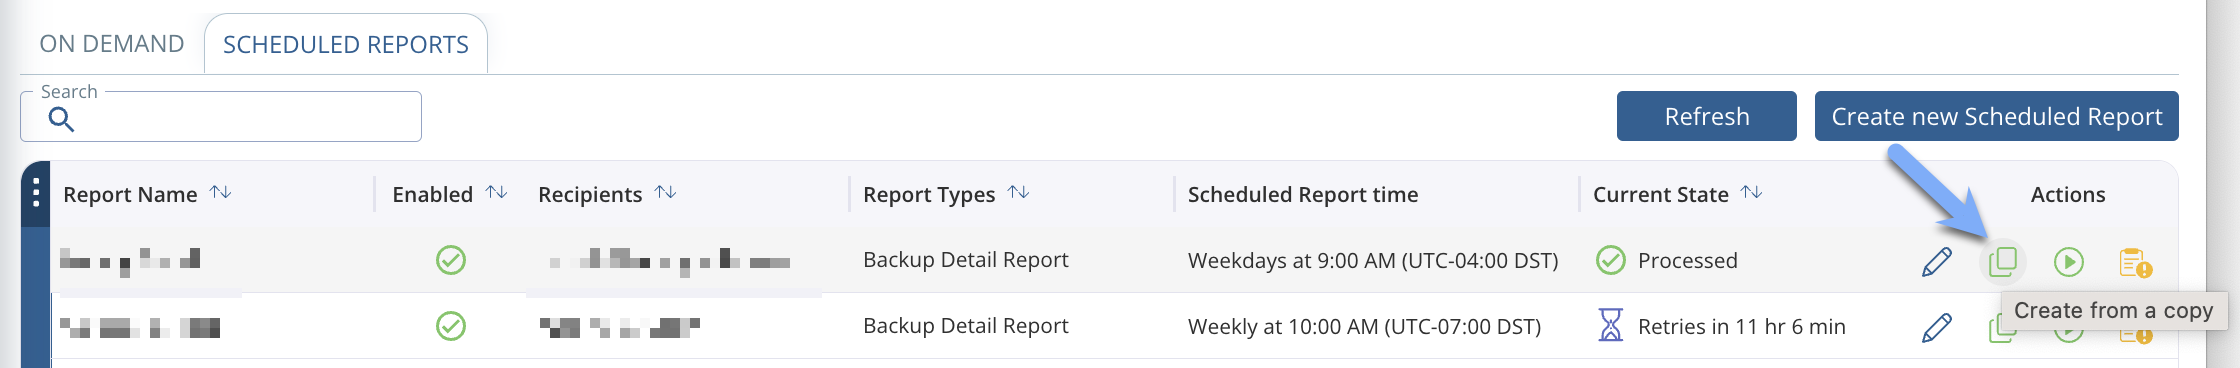 Copy a Scheduled Report.png